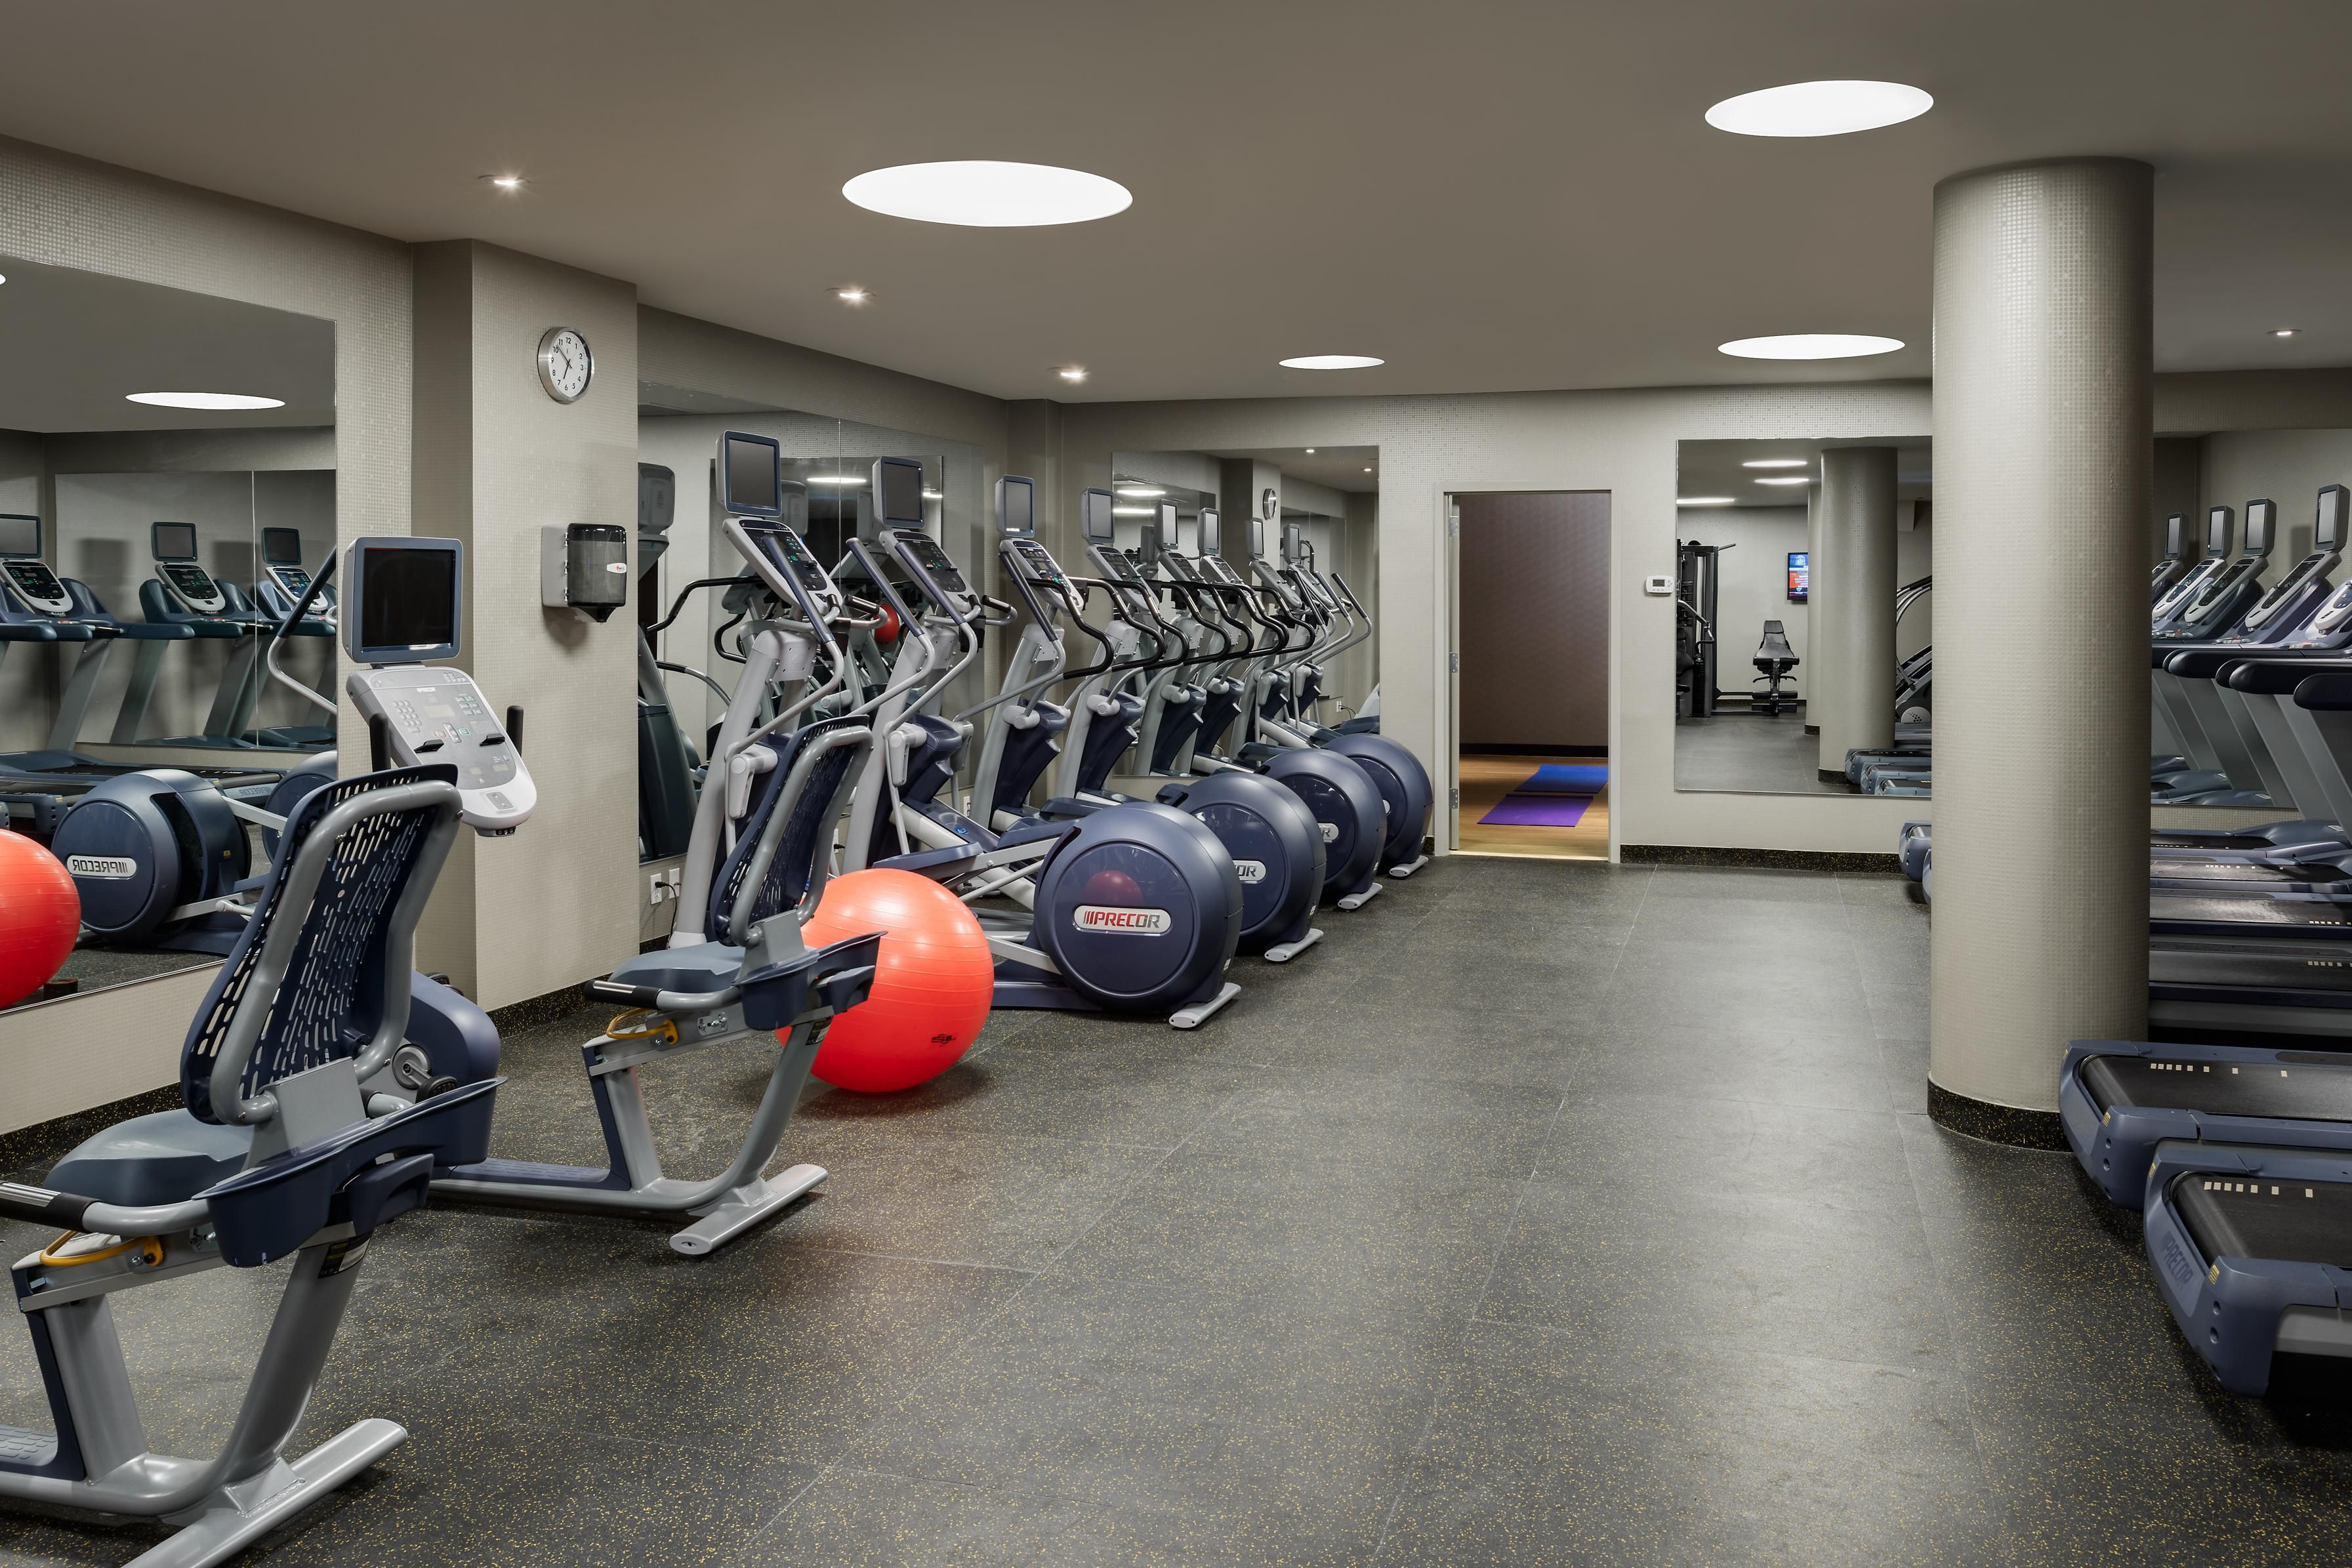 Our fitness center offers cardio equipment, free weights &amp; bikes,